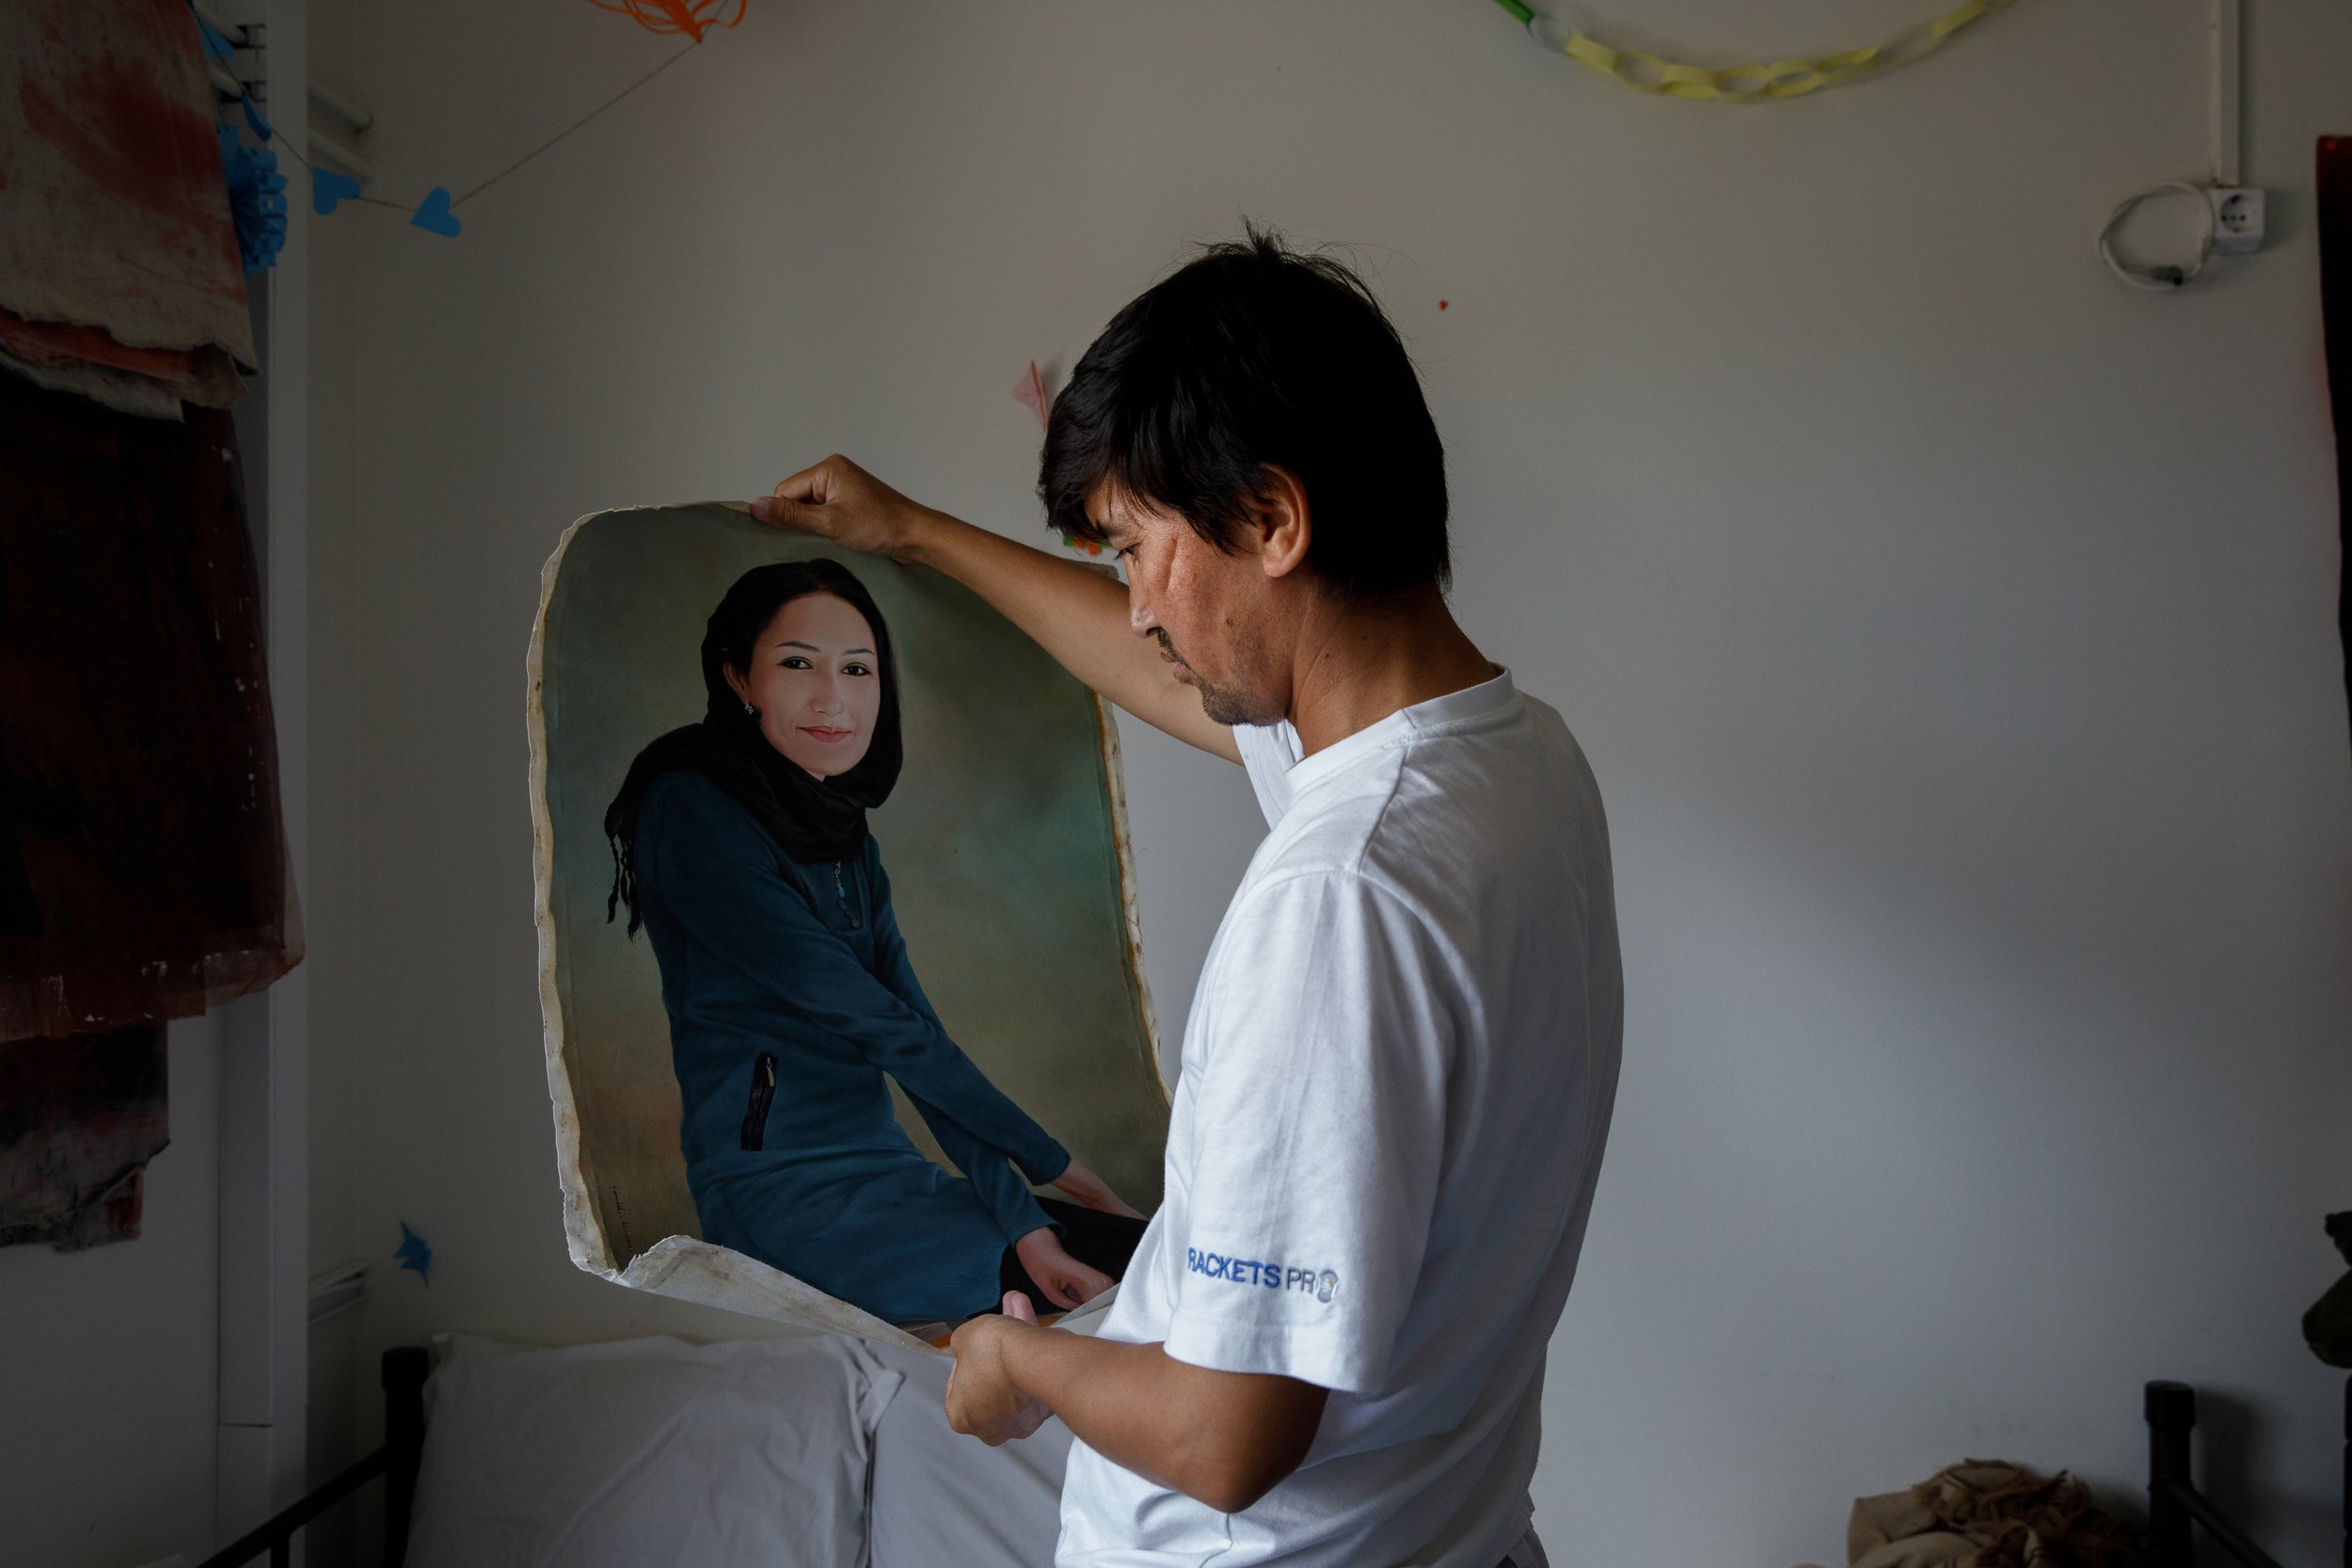  Juma Ahmadi holds up the a portrait of his wife, who stayed back in Afghanistan. Juma came with his two nieces, Farida, violinist, and Zhora, trumpet player, and left behind in Kabul his wife and his son, who at the time was one month old. June 2022